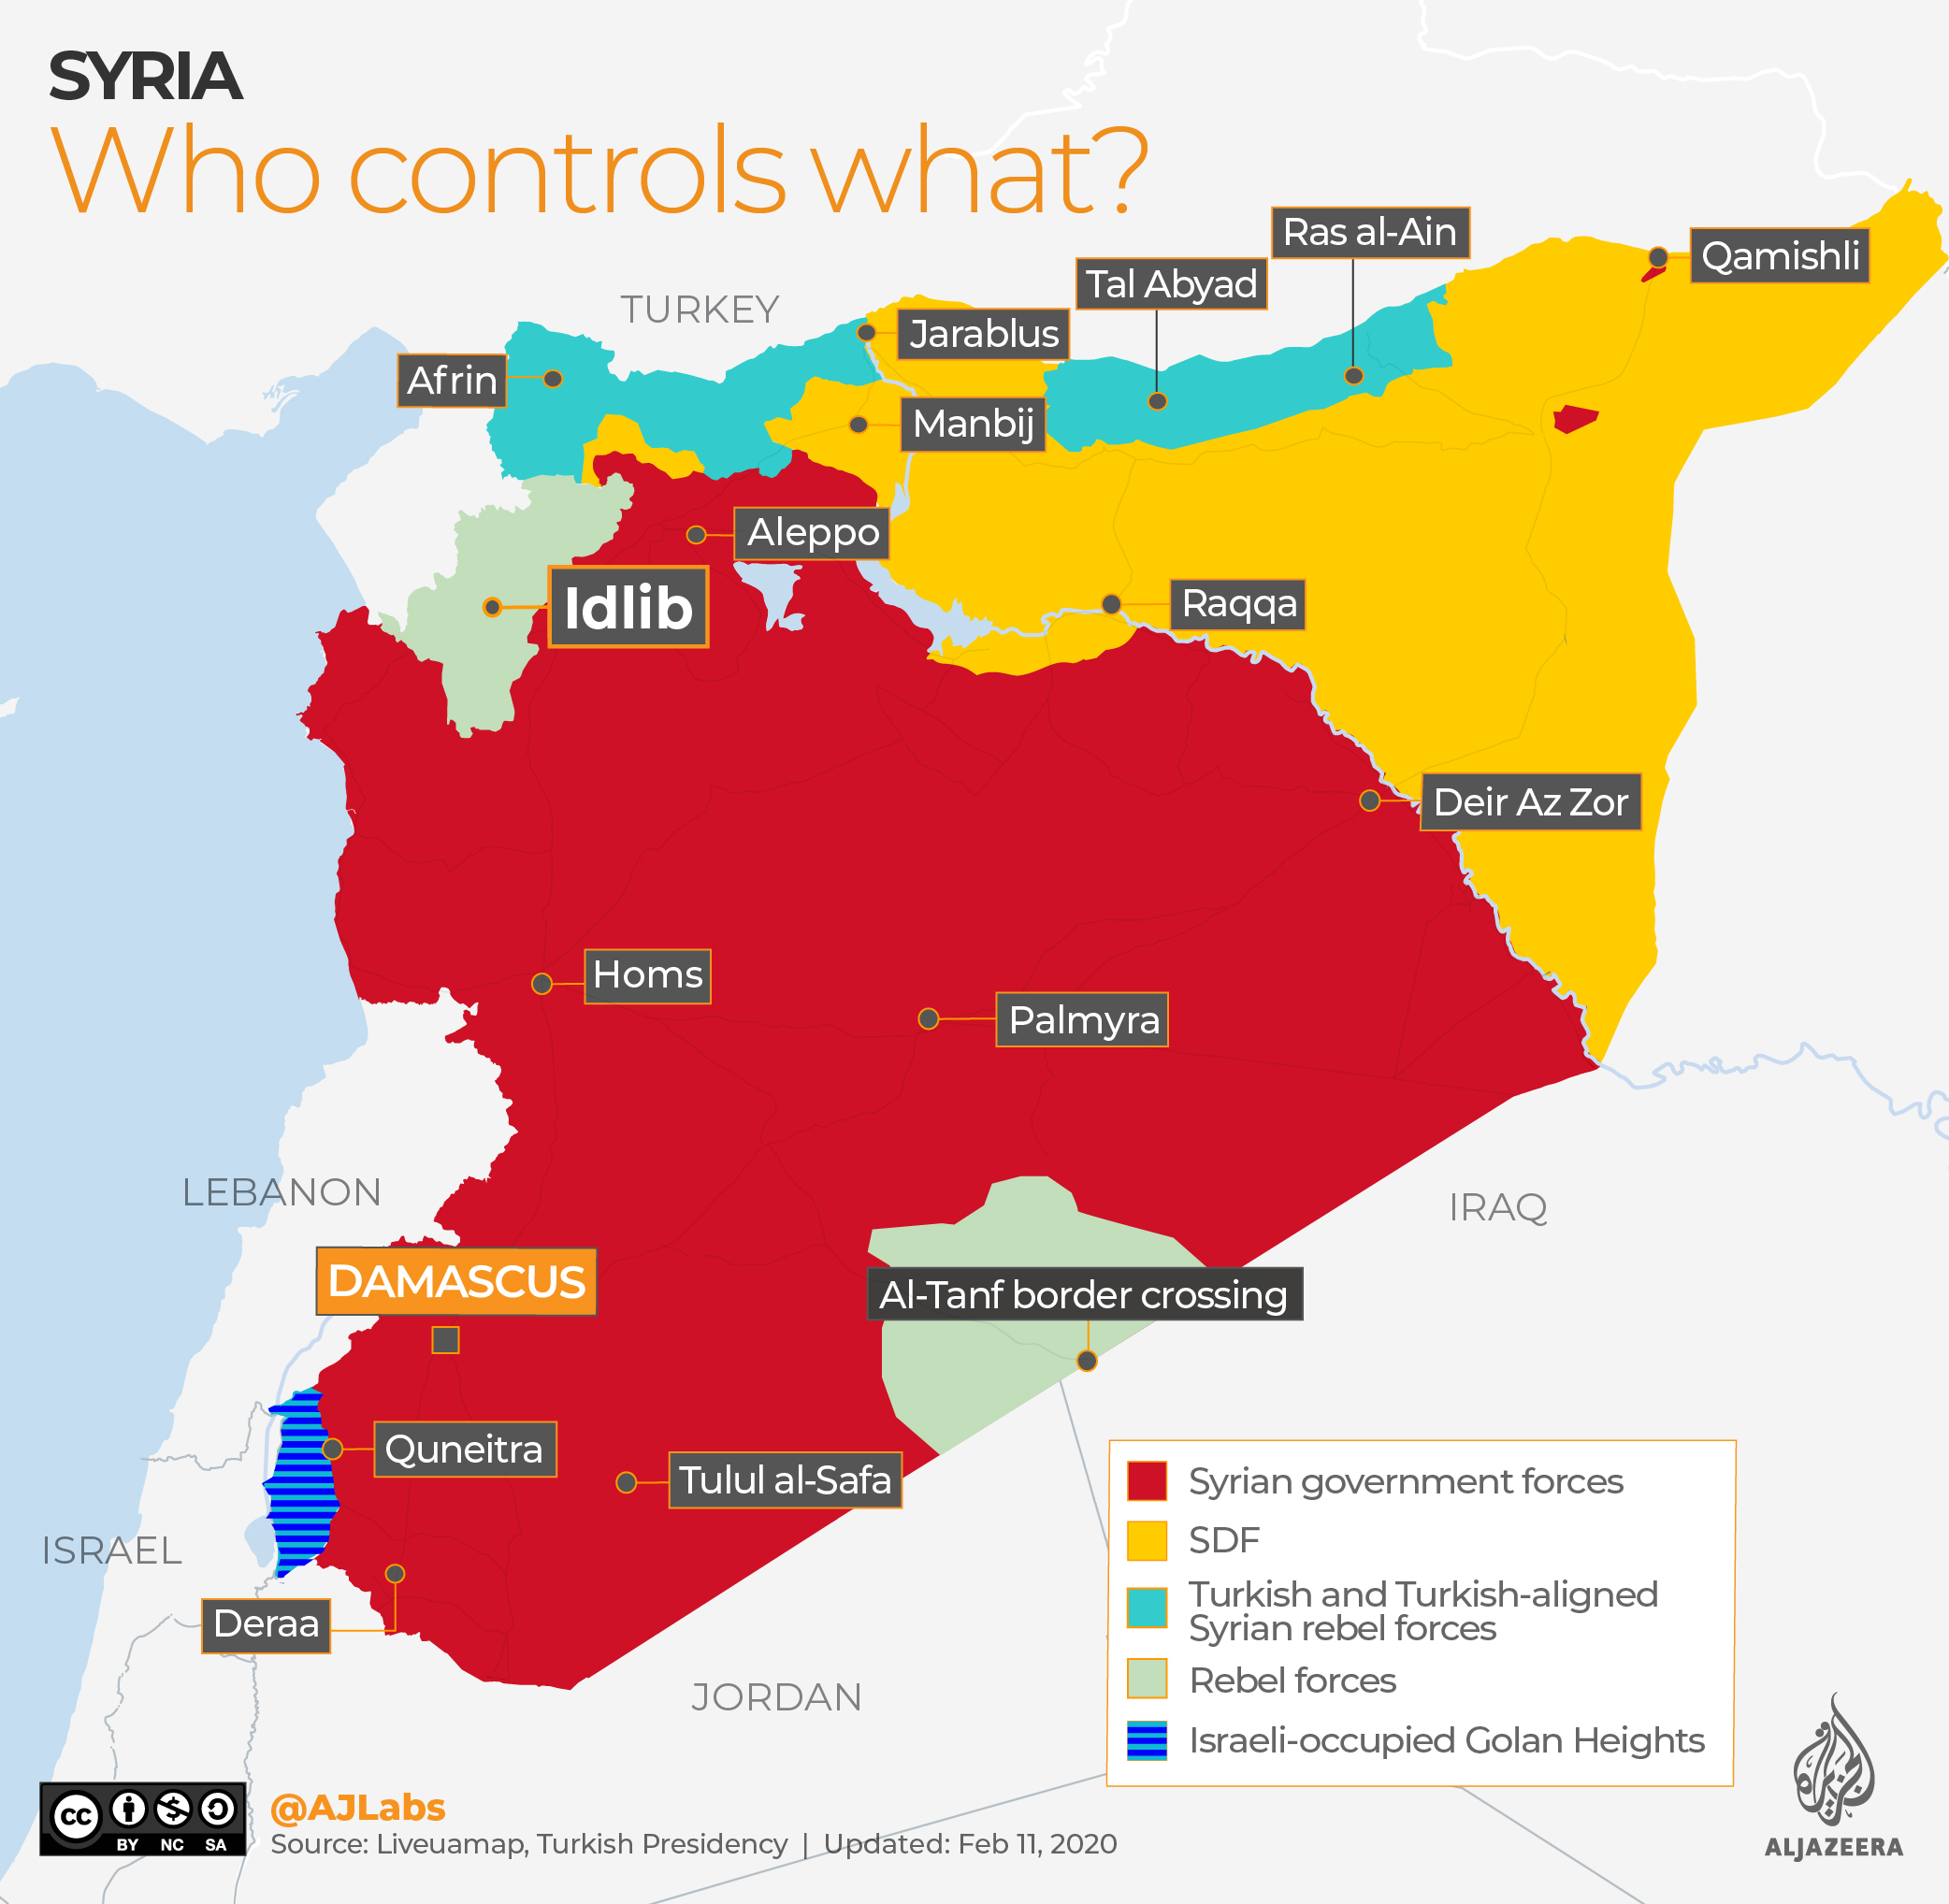 INTERACTIVE: Syria Who controls what map - FEB 11 2020